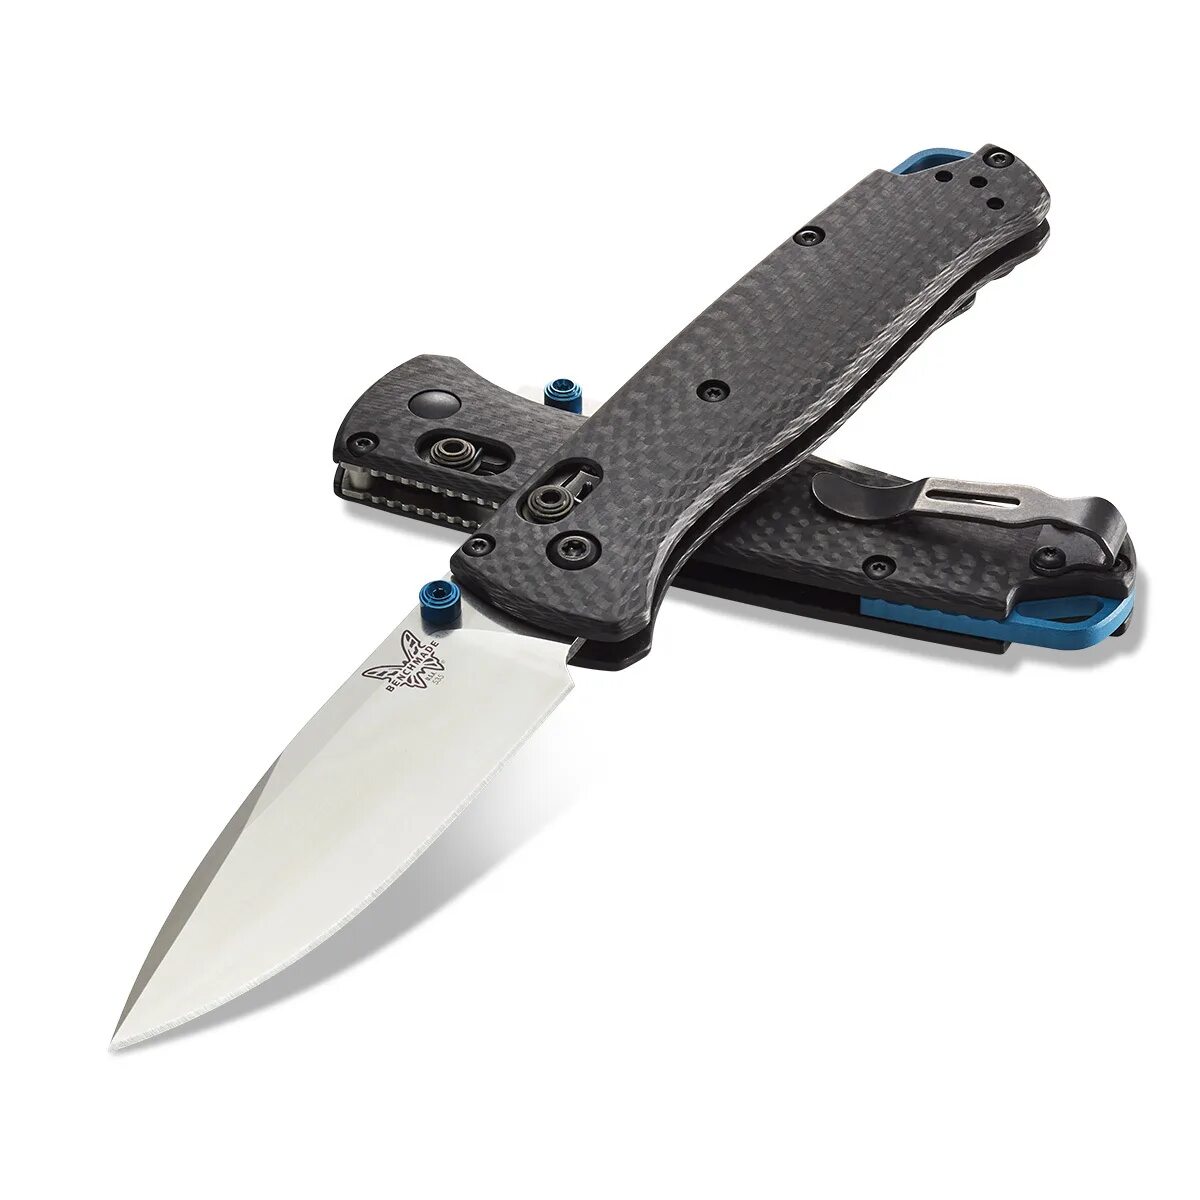 Нож 535. Benchmade Bugout 535. Benchmade Bugout s90v. Benchmade Bugout 535-3 Carbon Fiber. Нож Benchmade Bugout.